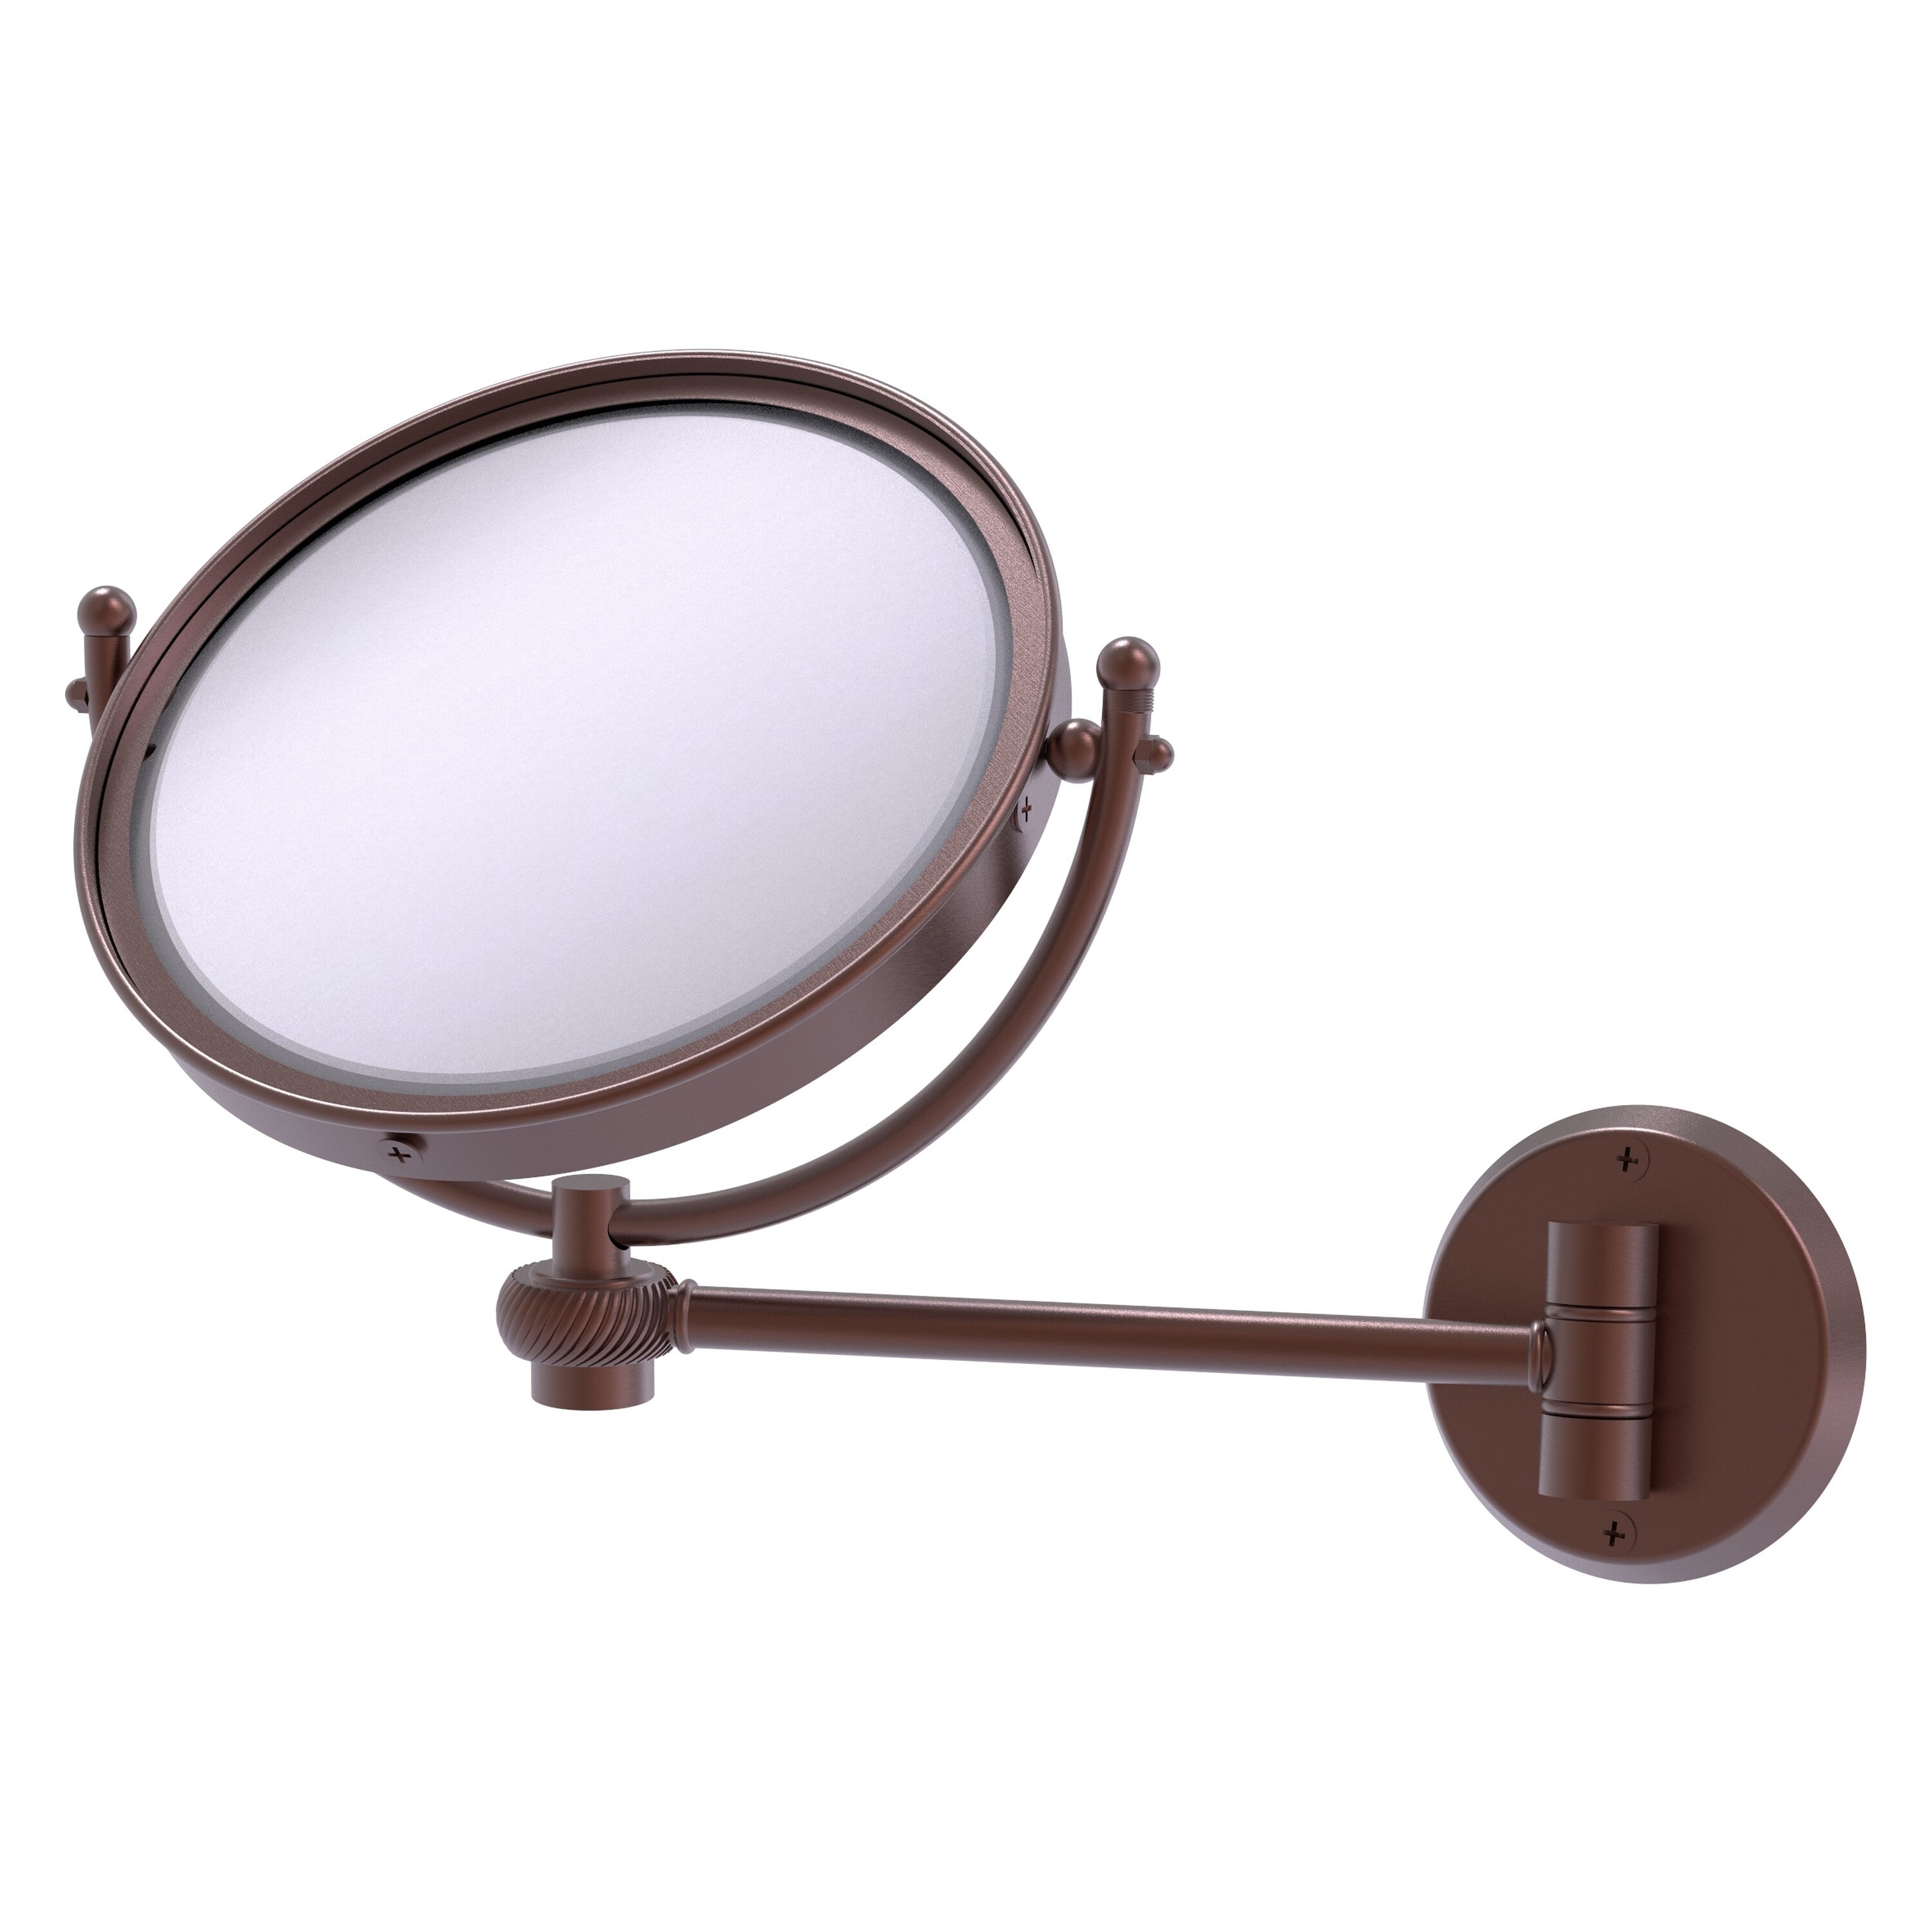 8-in x 10-in Antique Copper Double-sided 3X Magnifying Wall-mounted Vanity Mirror | - Allied Brass WM-5T/3X-CA